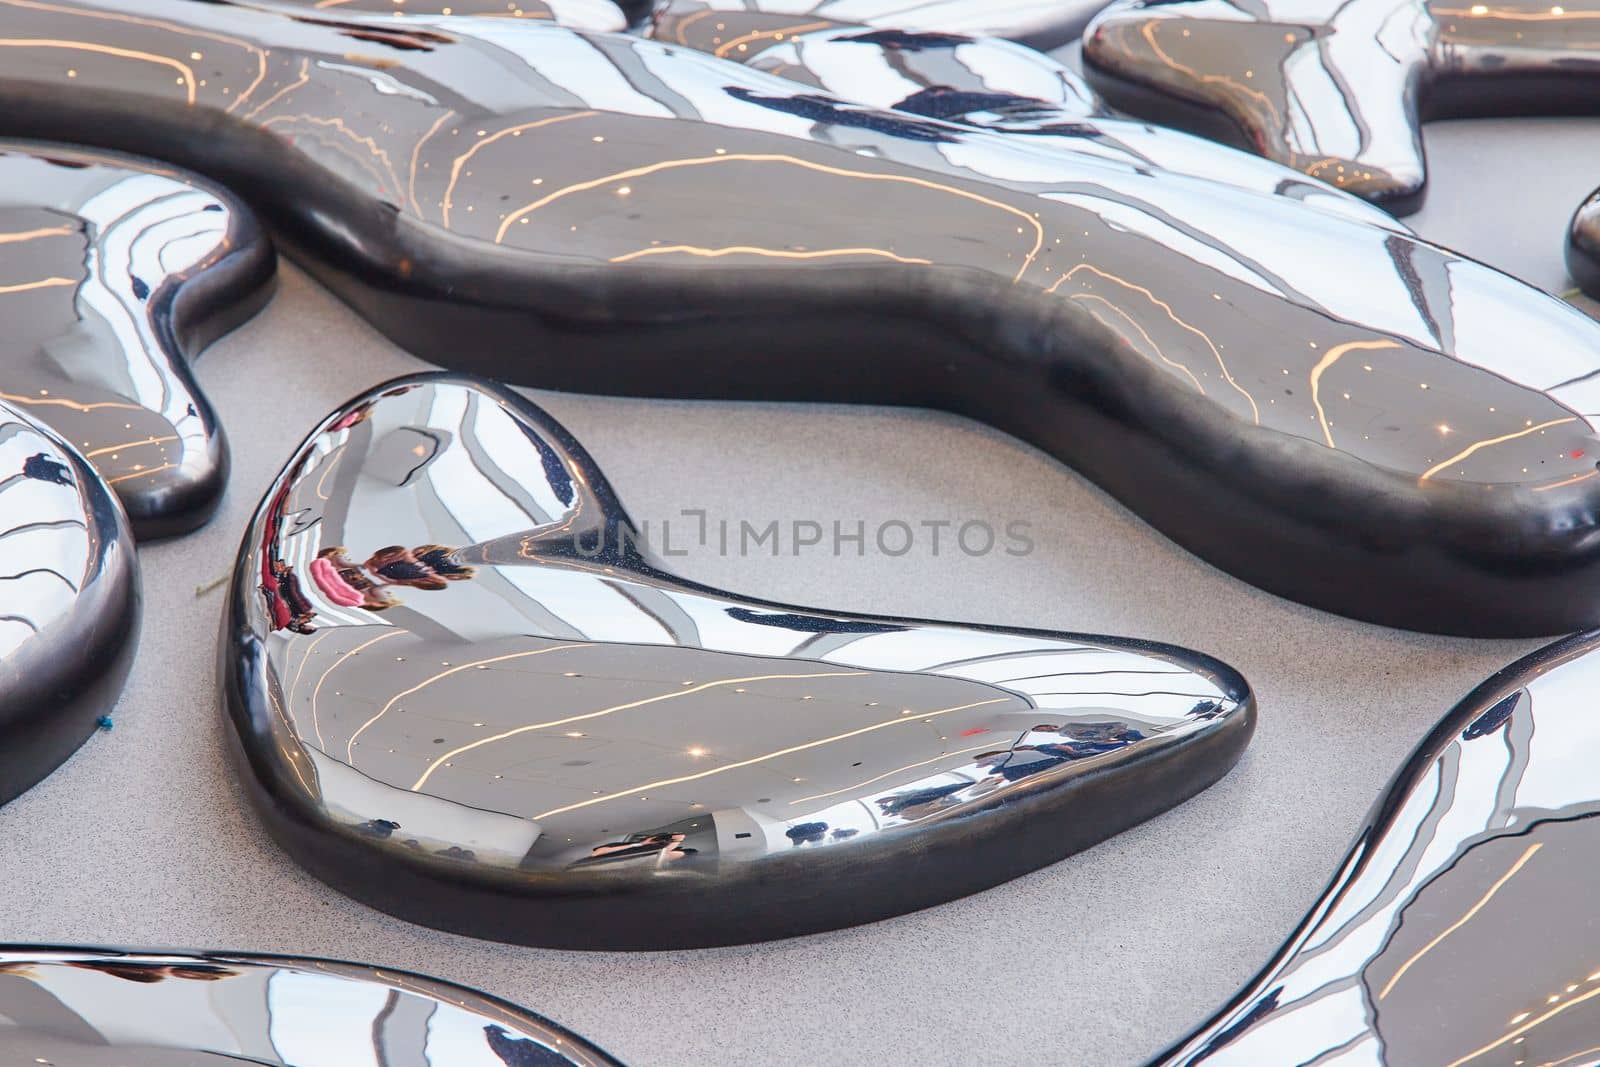 Ground detail of art exhibit melting reflecting shiny metal mirror pieces by njproductions